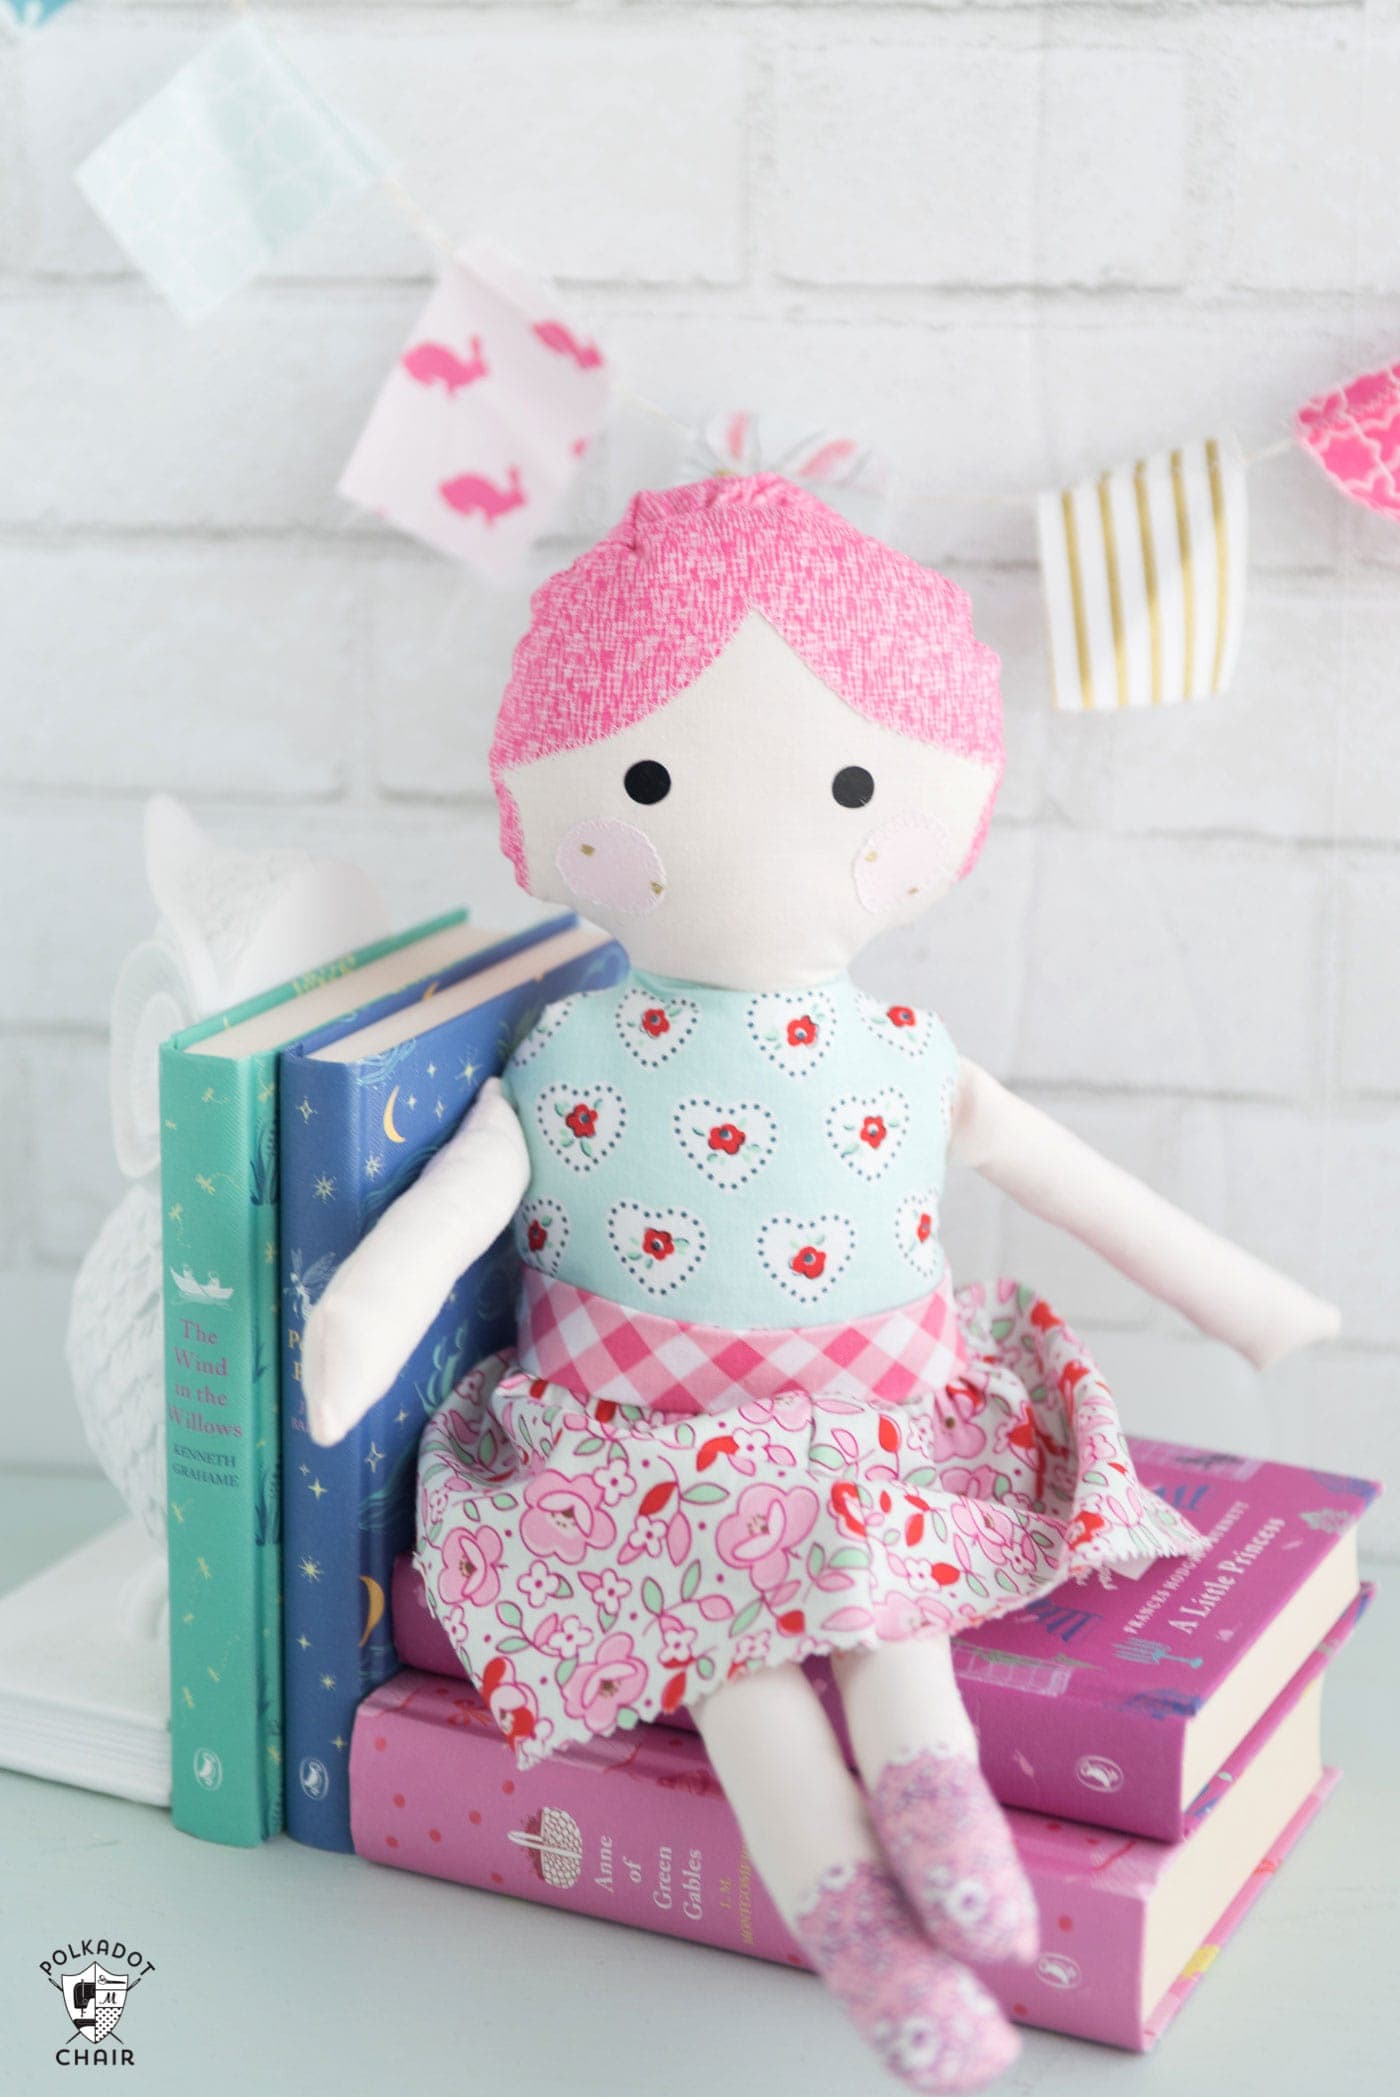 Review of the Dolly Book by Elea Lutz- lots of cute patterns for handmade dolls and accessories